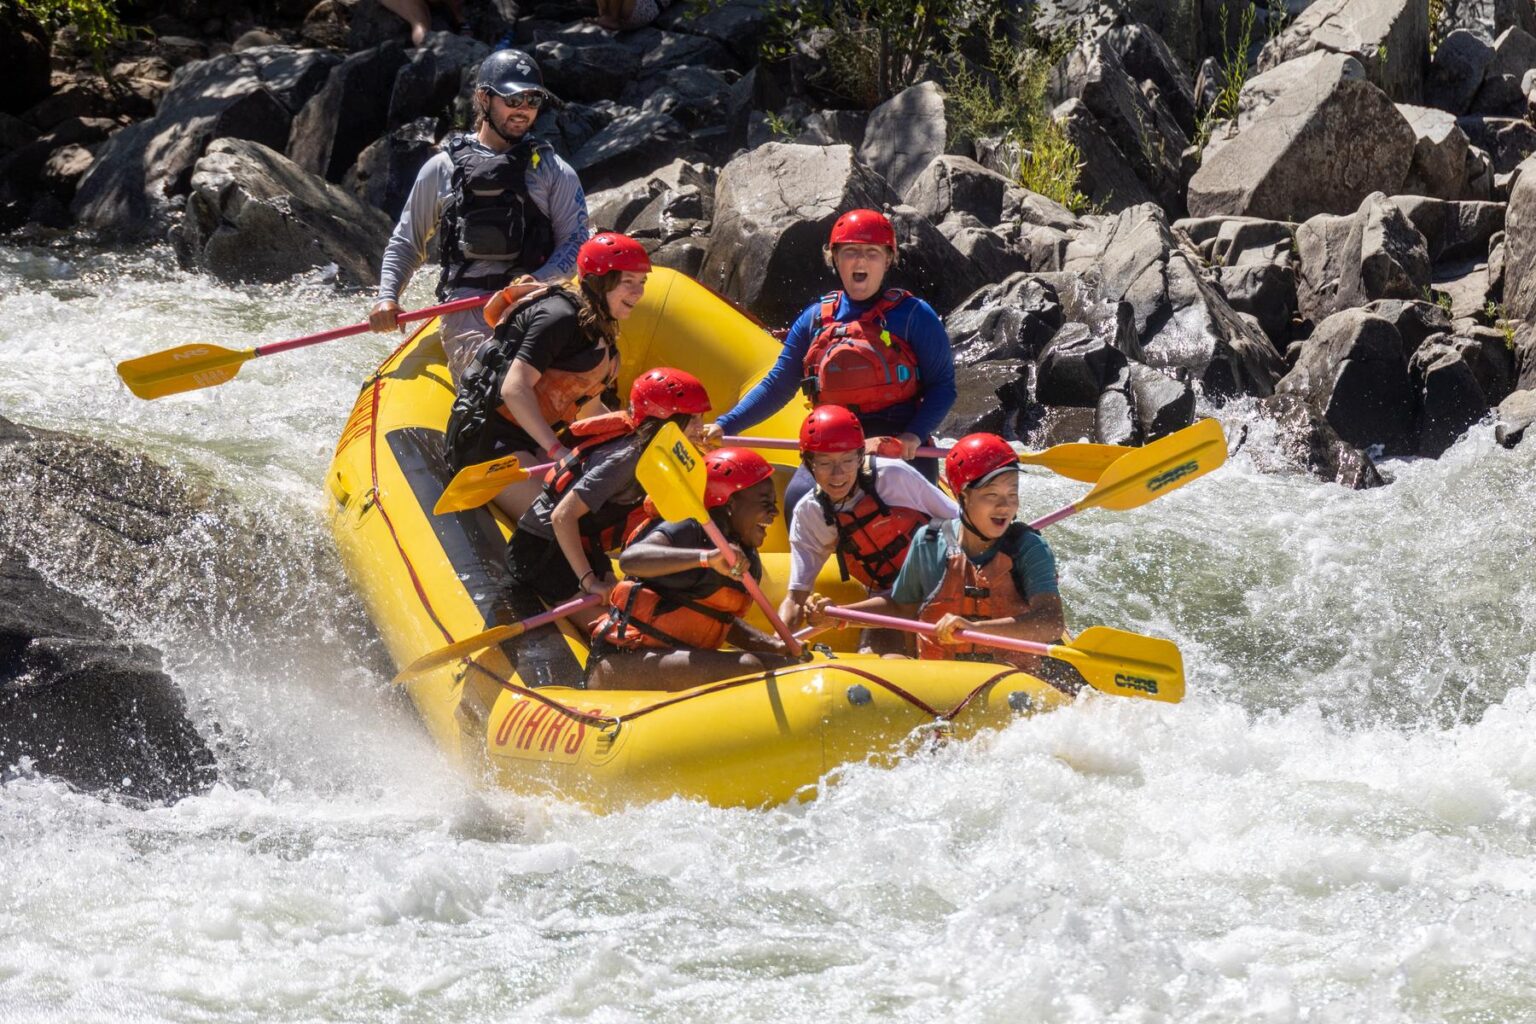 A group of students having a blast as they go through a rapid on the South Fork American in a yellow raft.